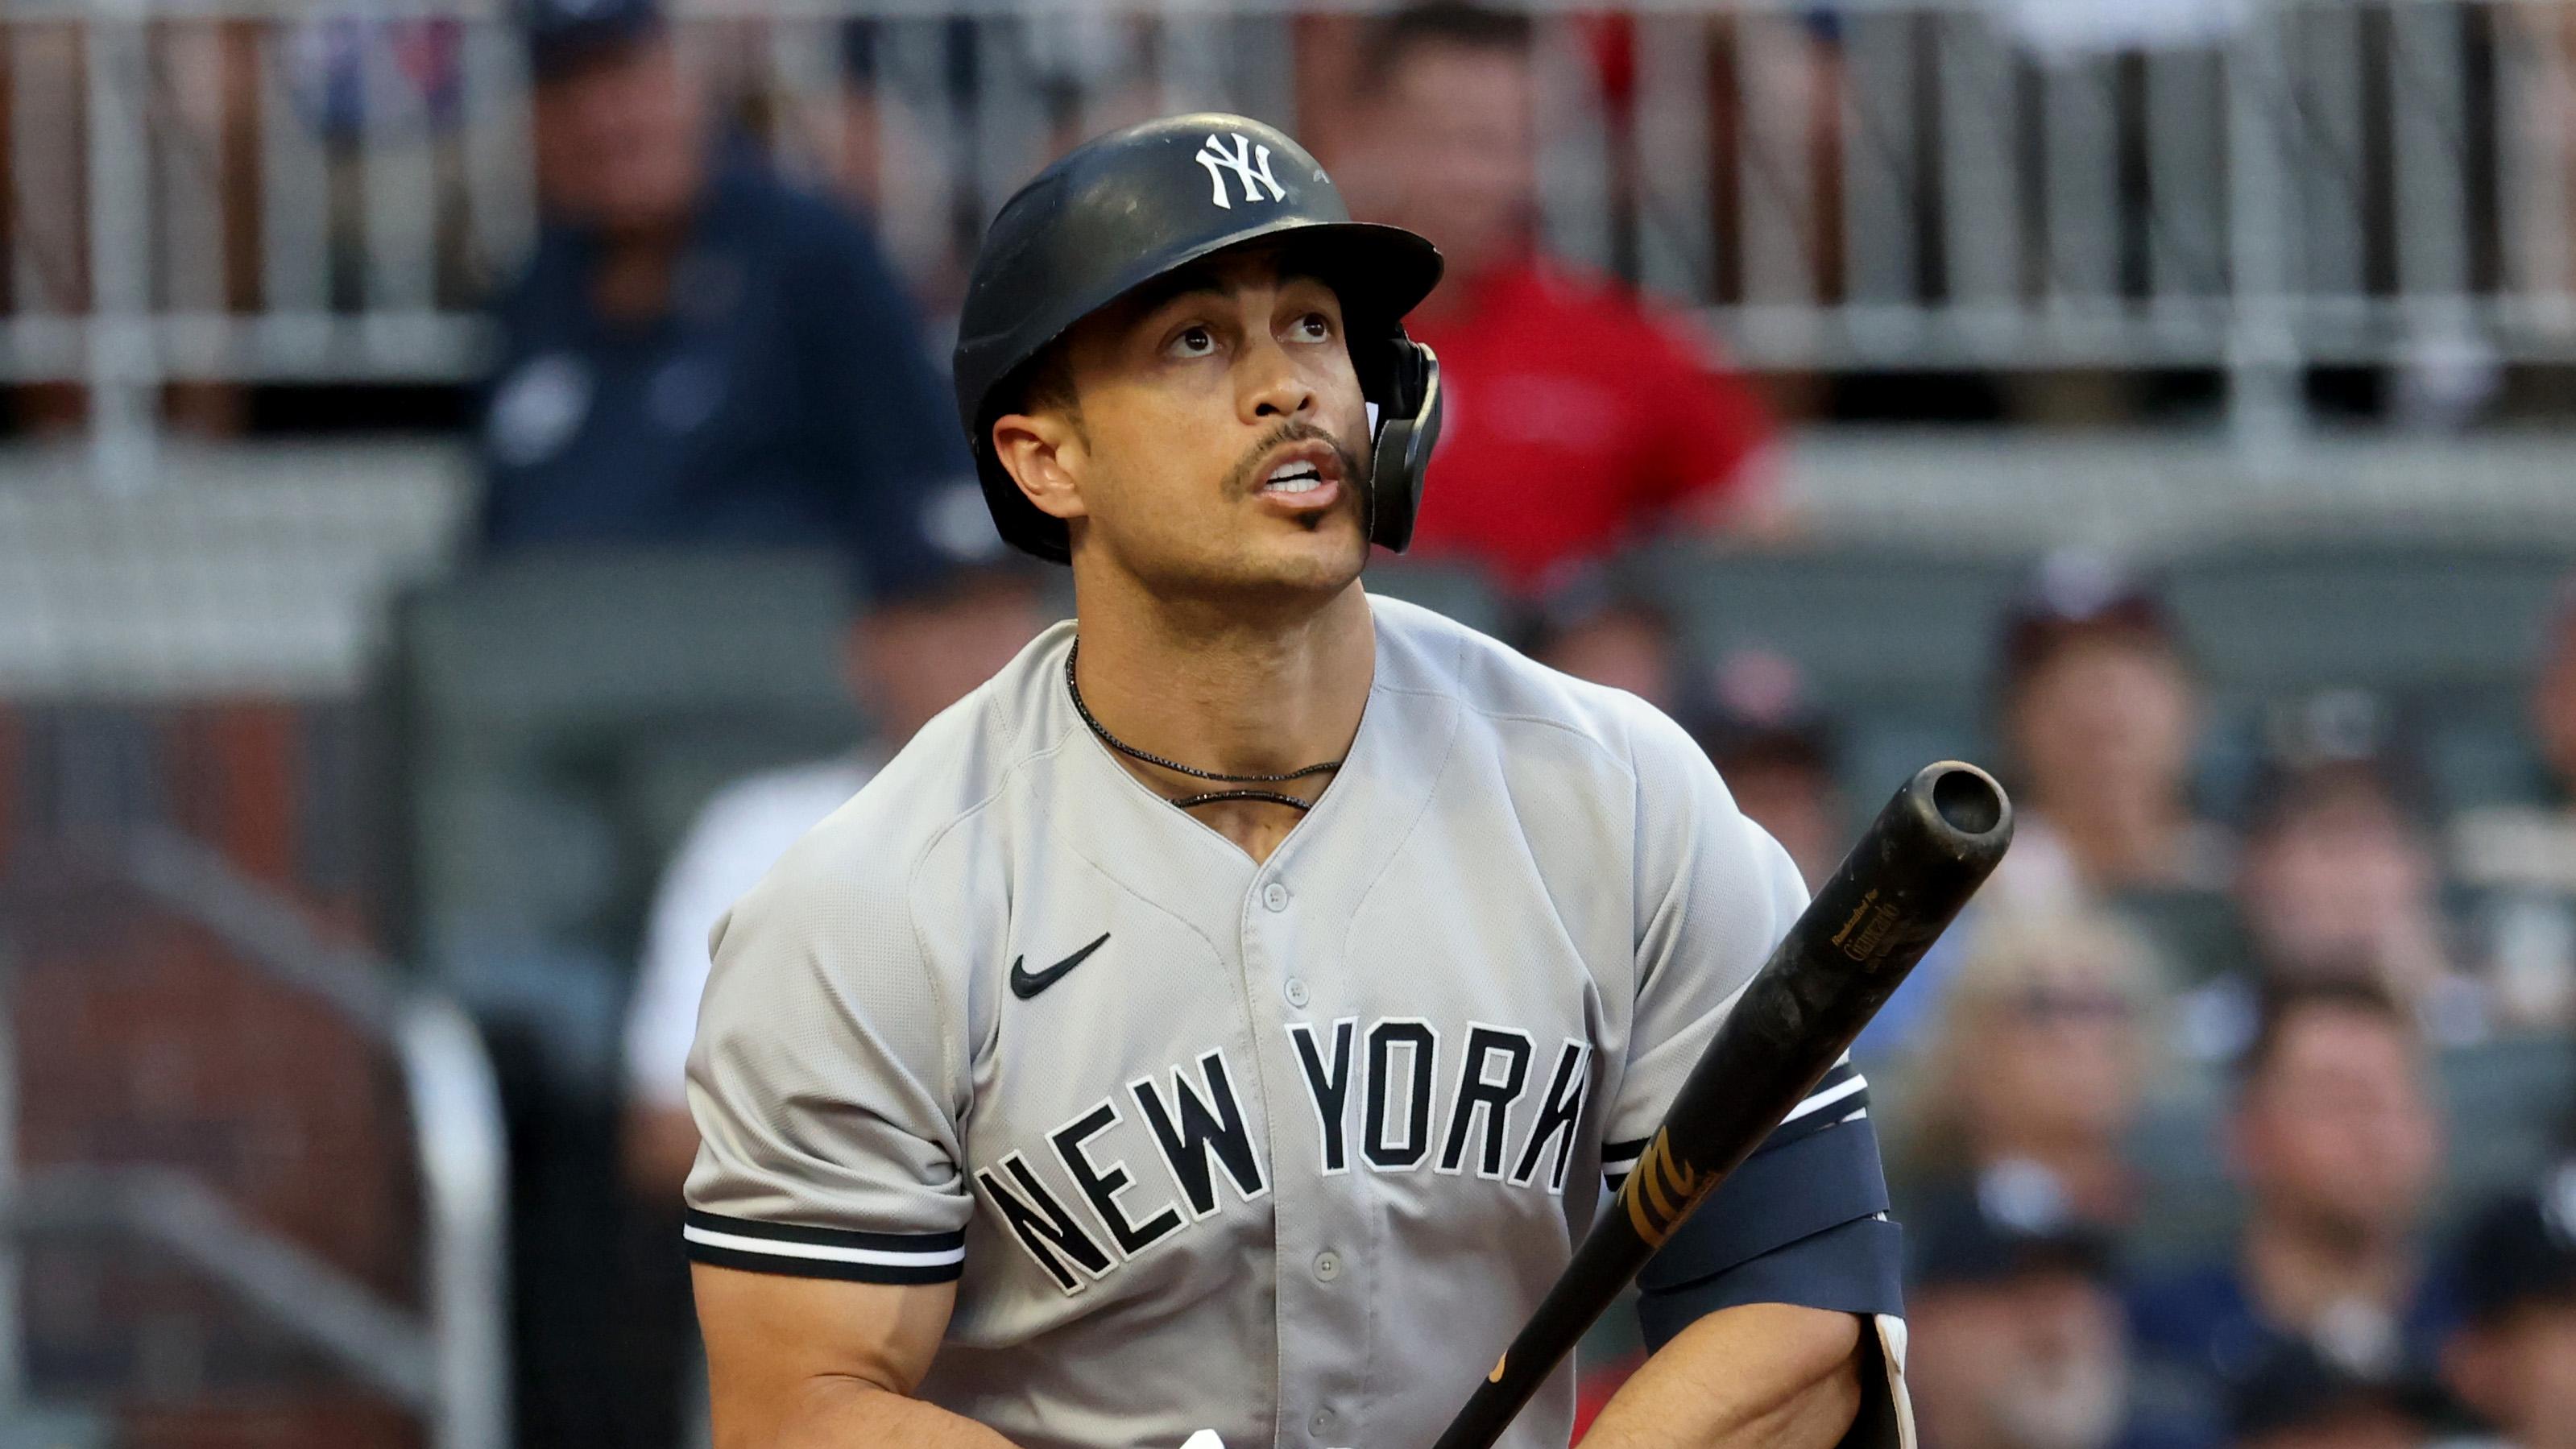 New York Yankees outfielder Giancarlo Stanton (27) hits a solo home run against the Atlanta Braves during the second inning at Truist Park. / Jason Getz - USA TODAY Sports